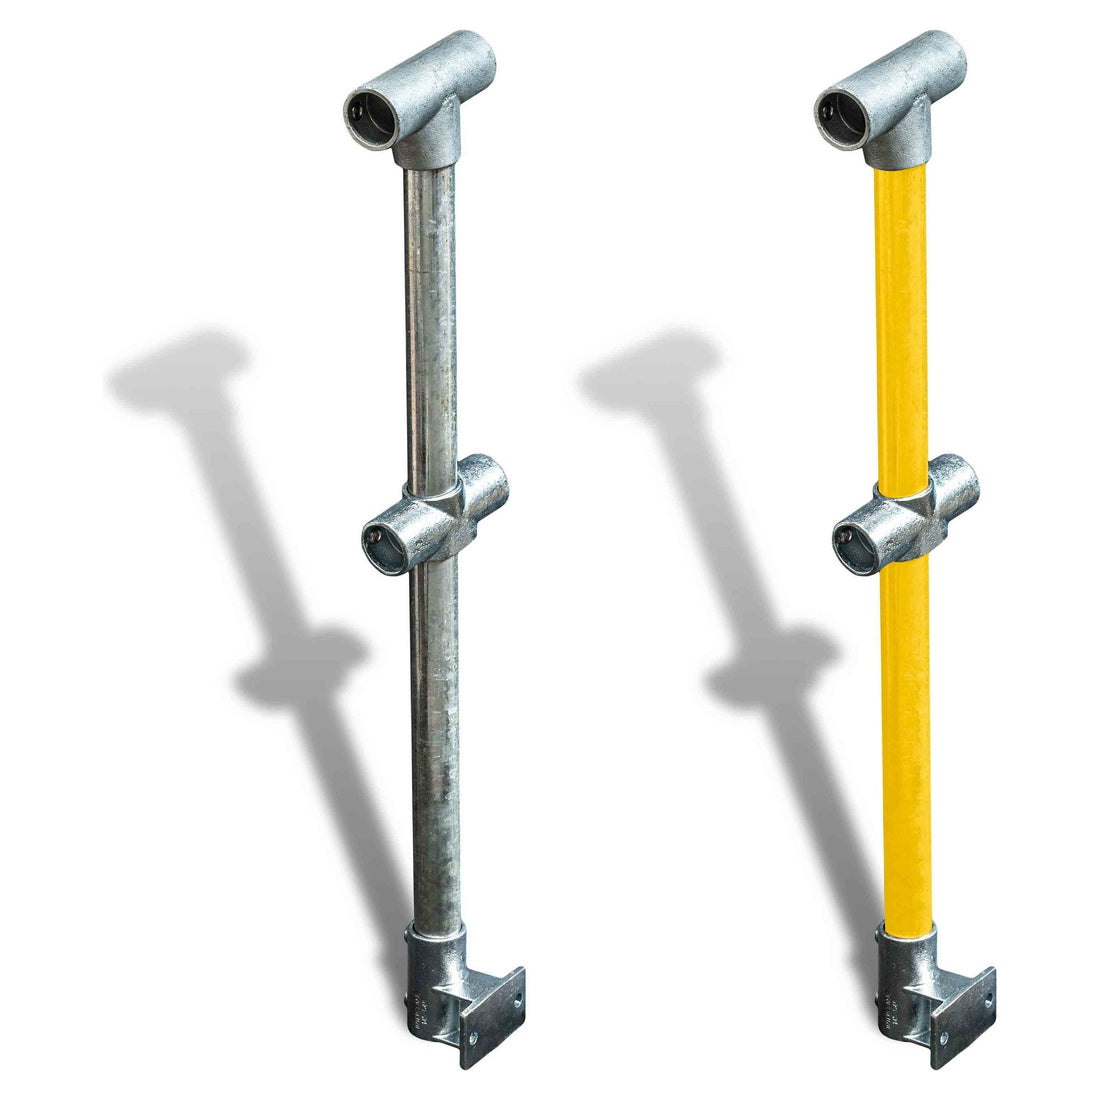 Cope Modular Rail - Angled Through Stanchion - Wall Mount